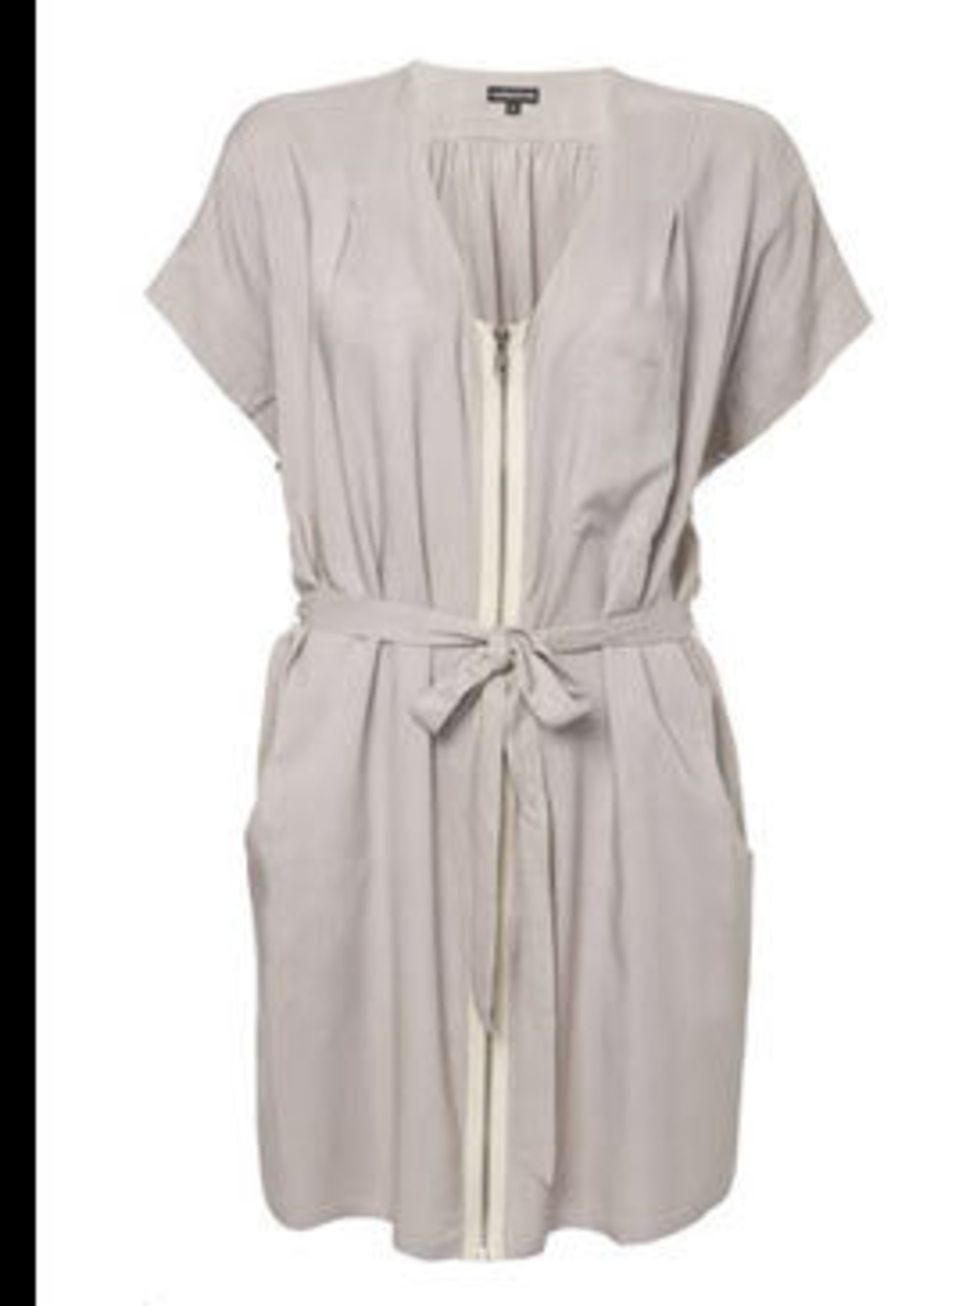 <p>Dress, £40 by <a href="http://www.warehouse.co.uk/fcp/product/fashion/Dresses/zip-through-dress/12328">Warehouse</a></p>